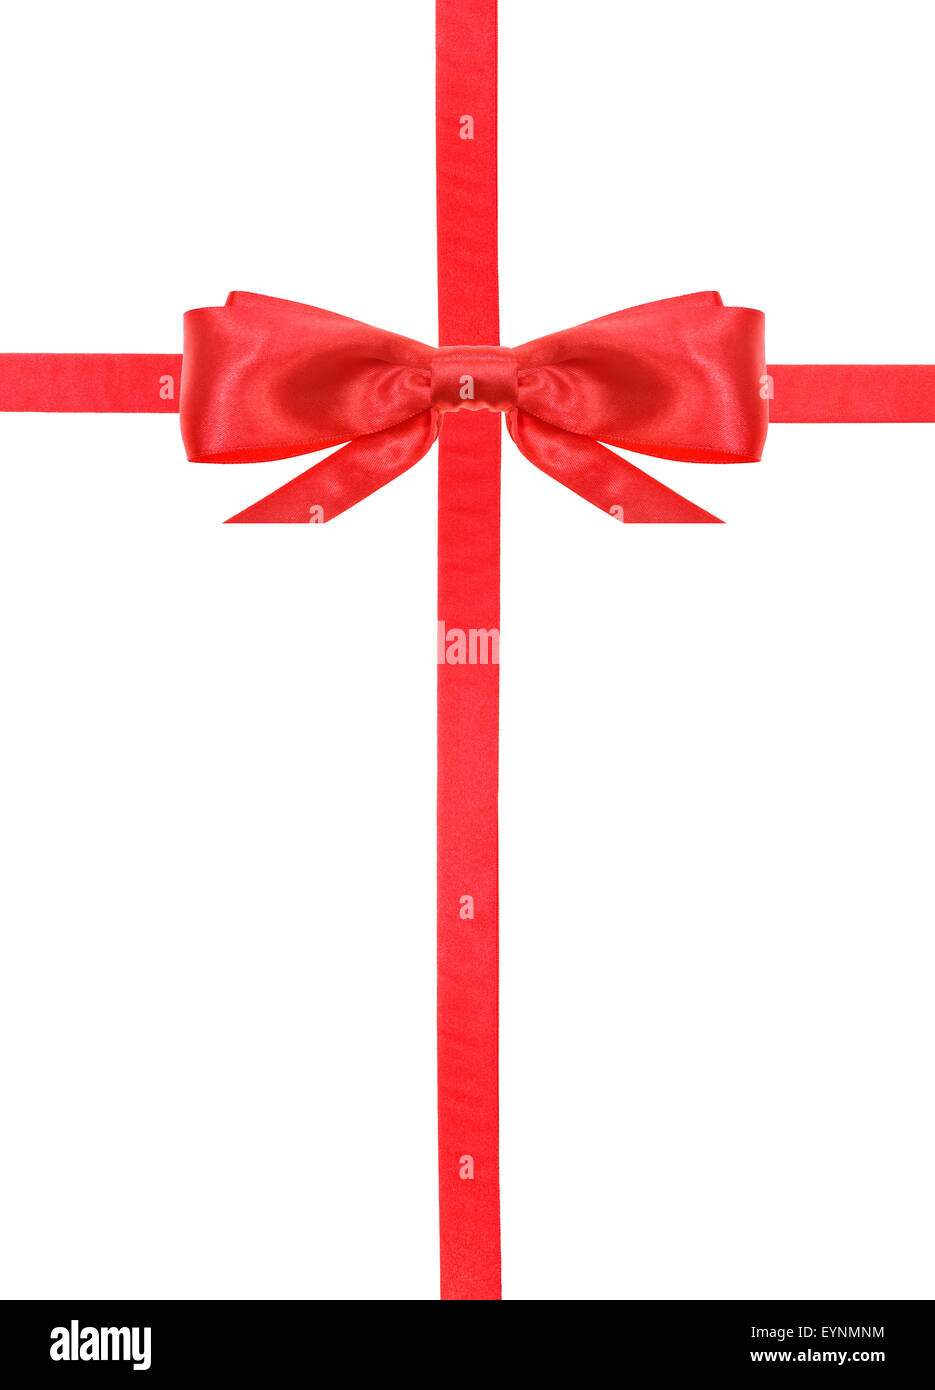 Red ribbons with bow stock image. Image of color, packaging - 61029087